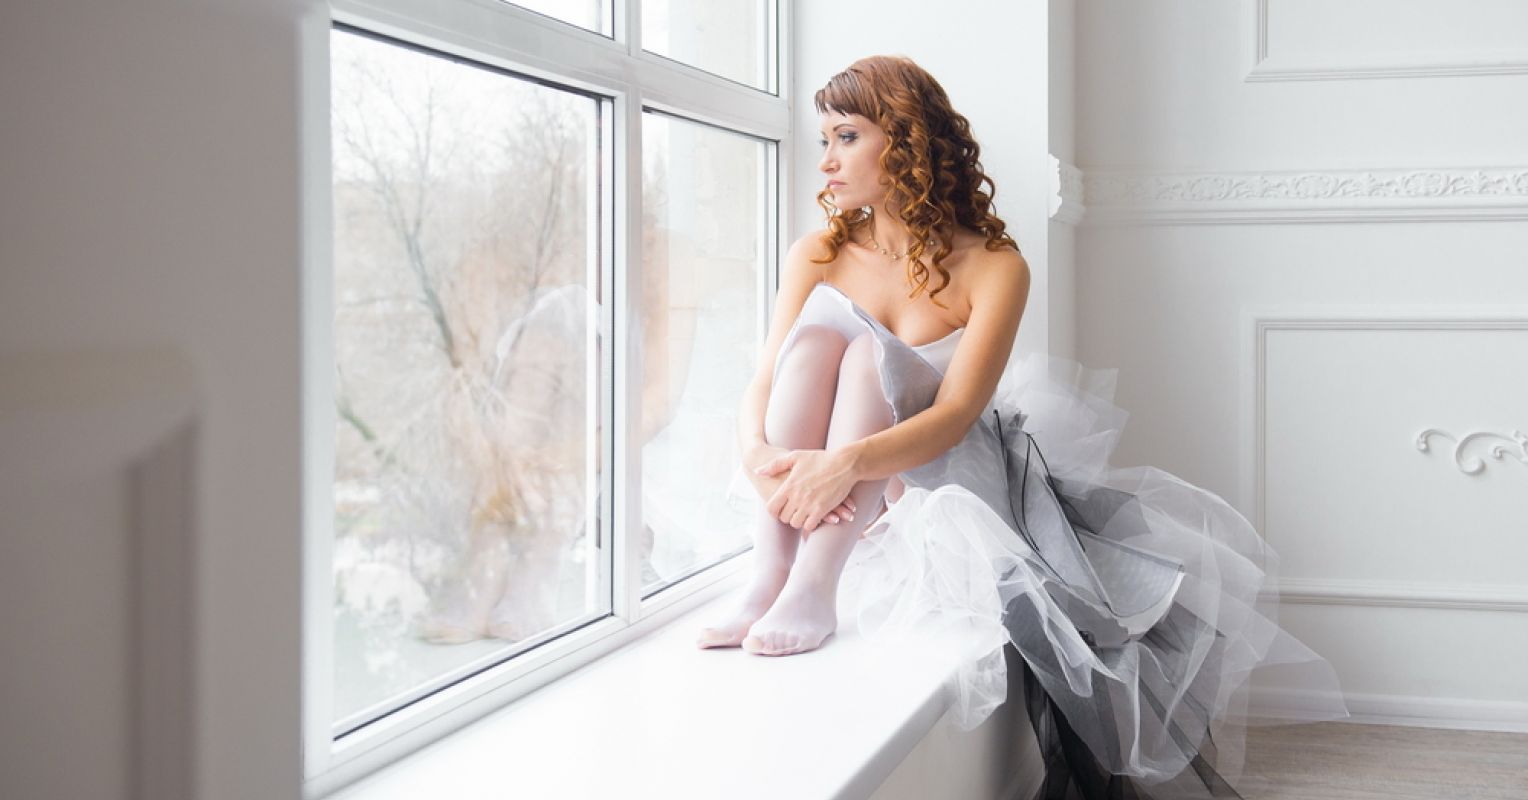 Why Post-Wedding Depression Is So Common | Psychology Today